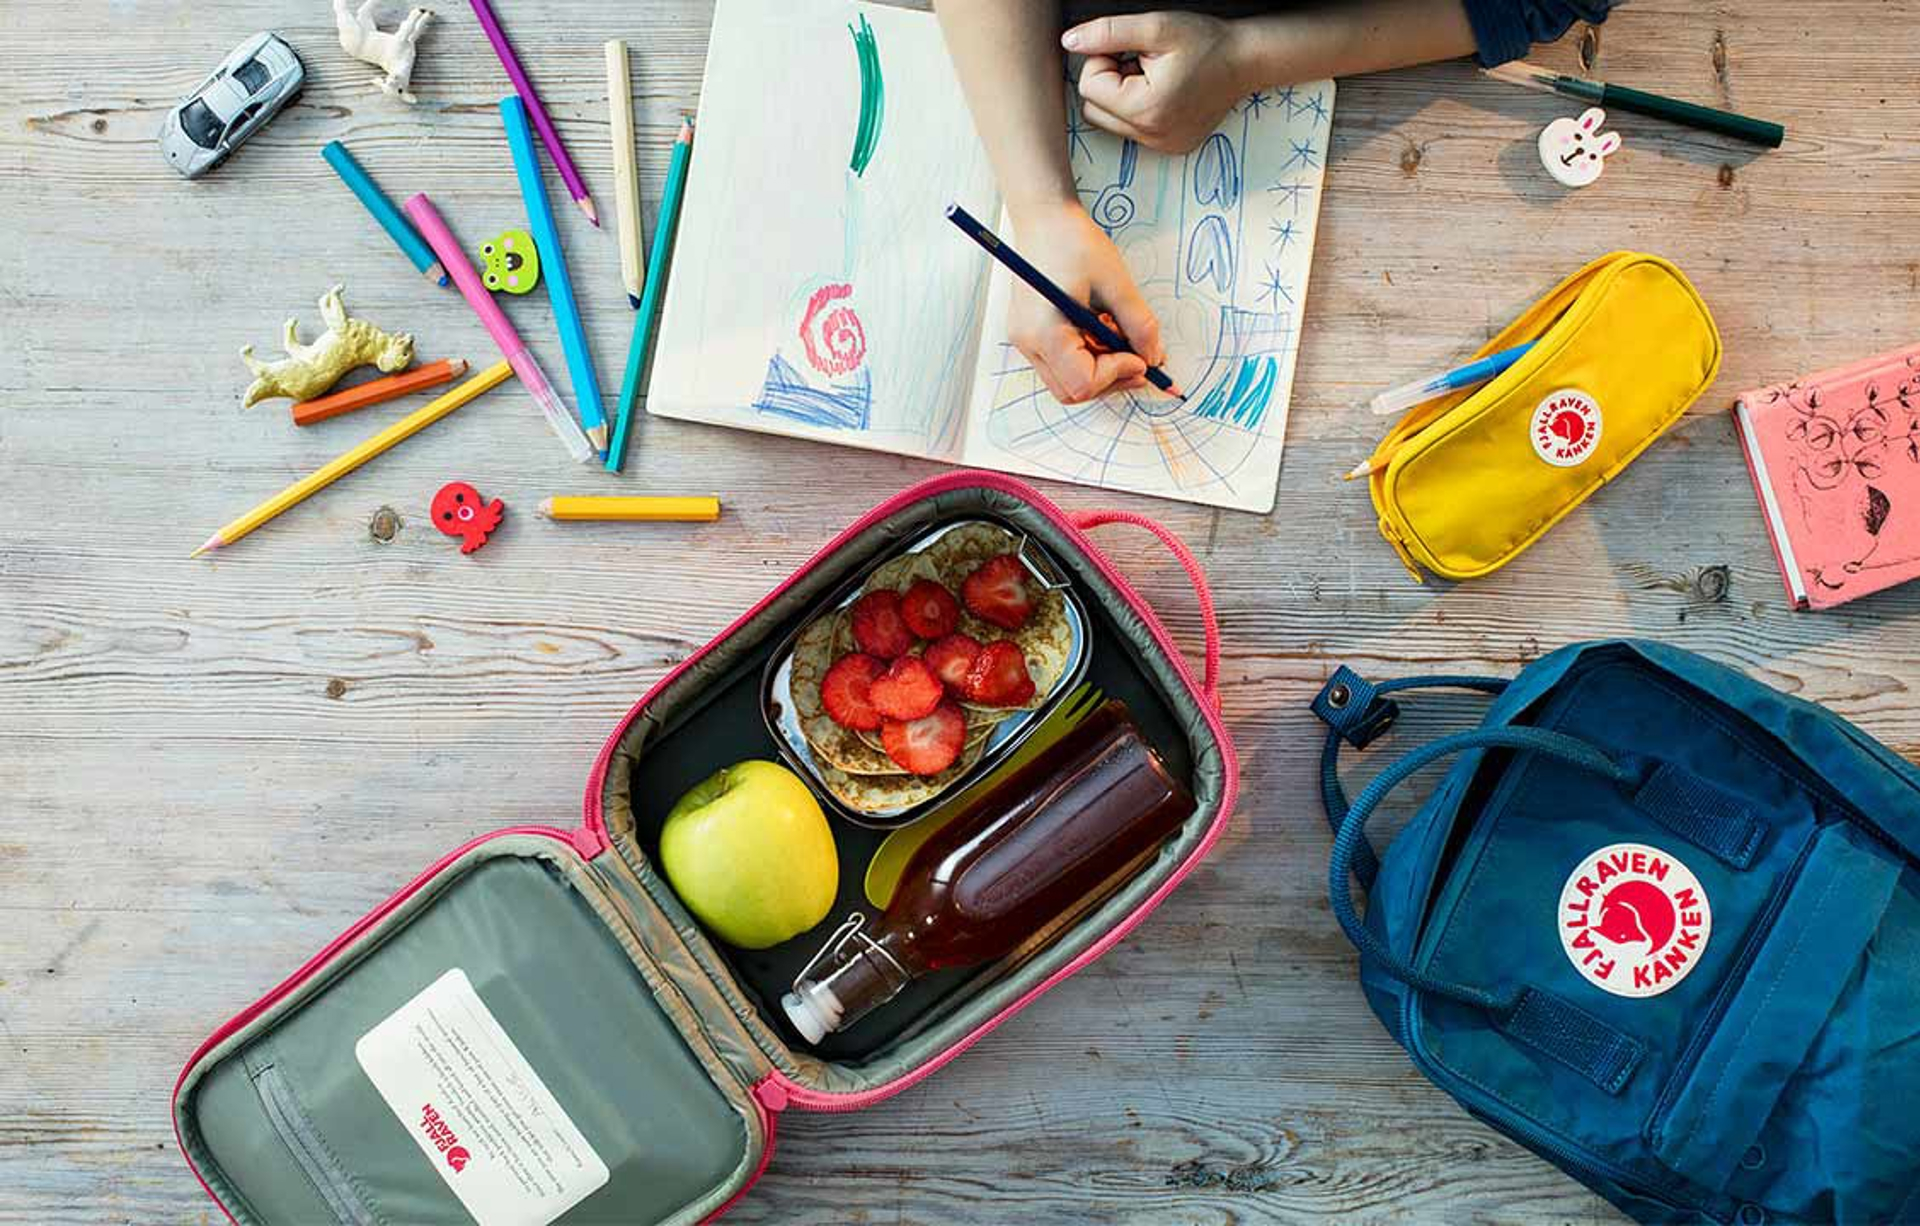 a child with fjallraven bag, lunch bag, and coloring supplies